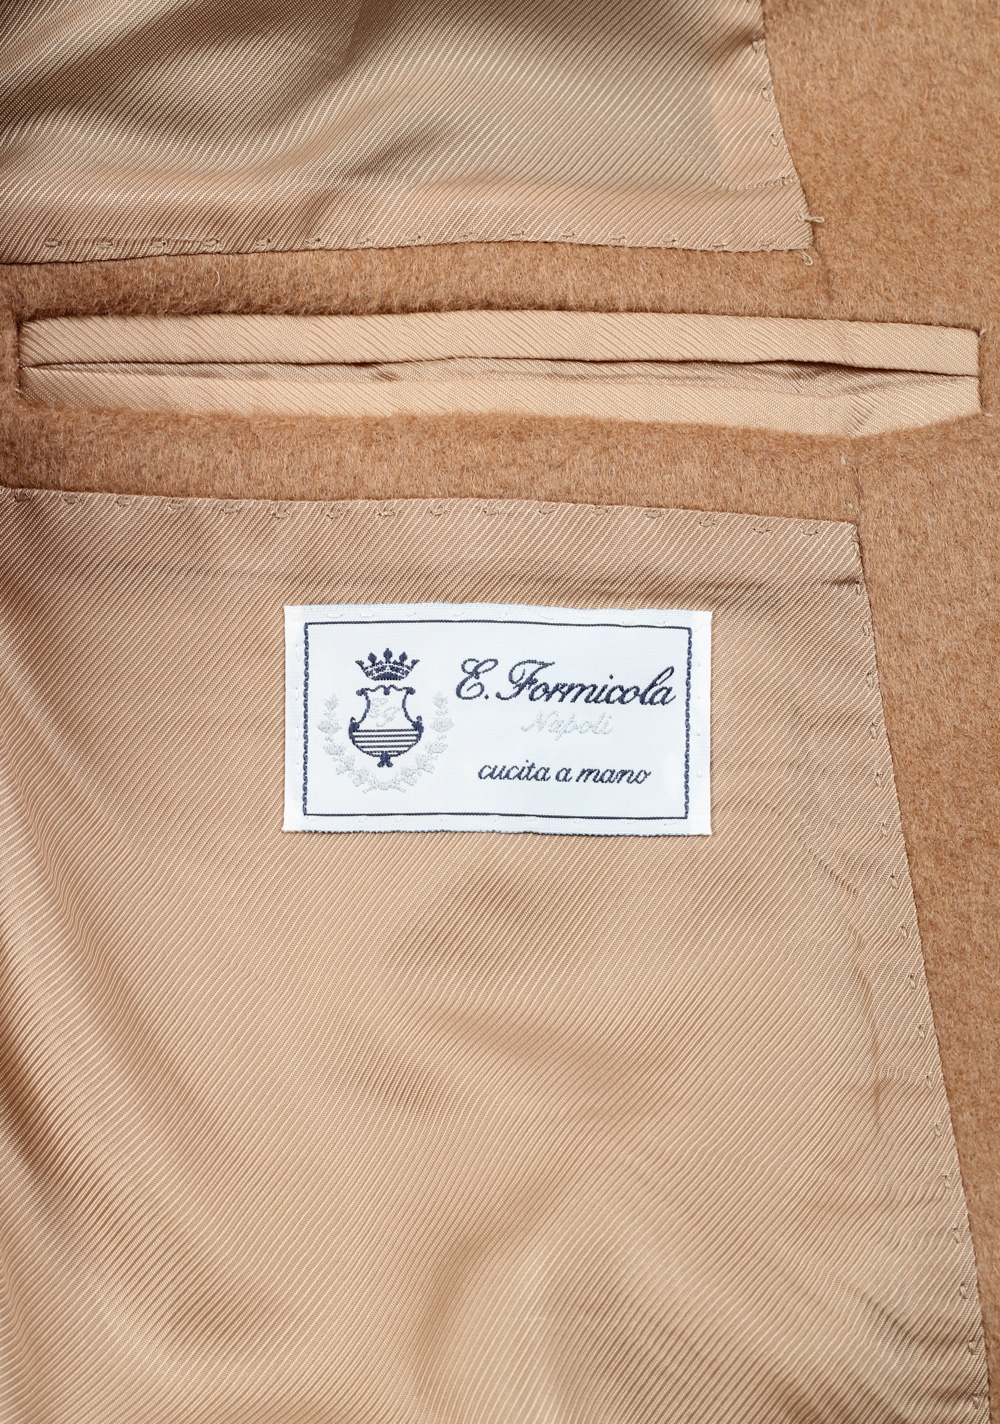 Errico Formicola Camel Double Breasted Over Coat Size 52 / 42R U.S. | Costume Limité